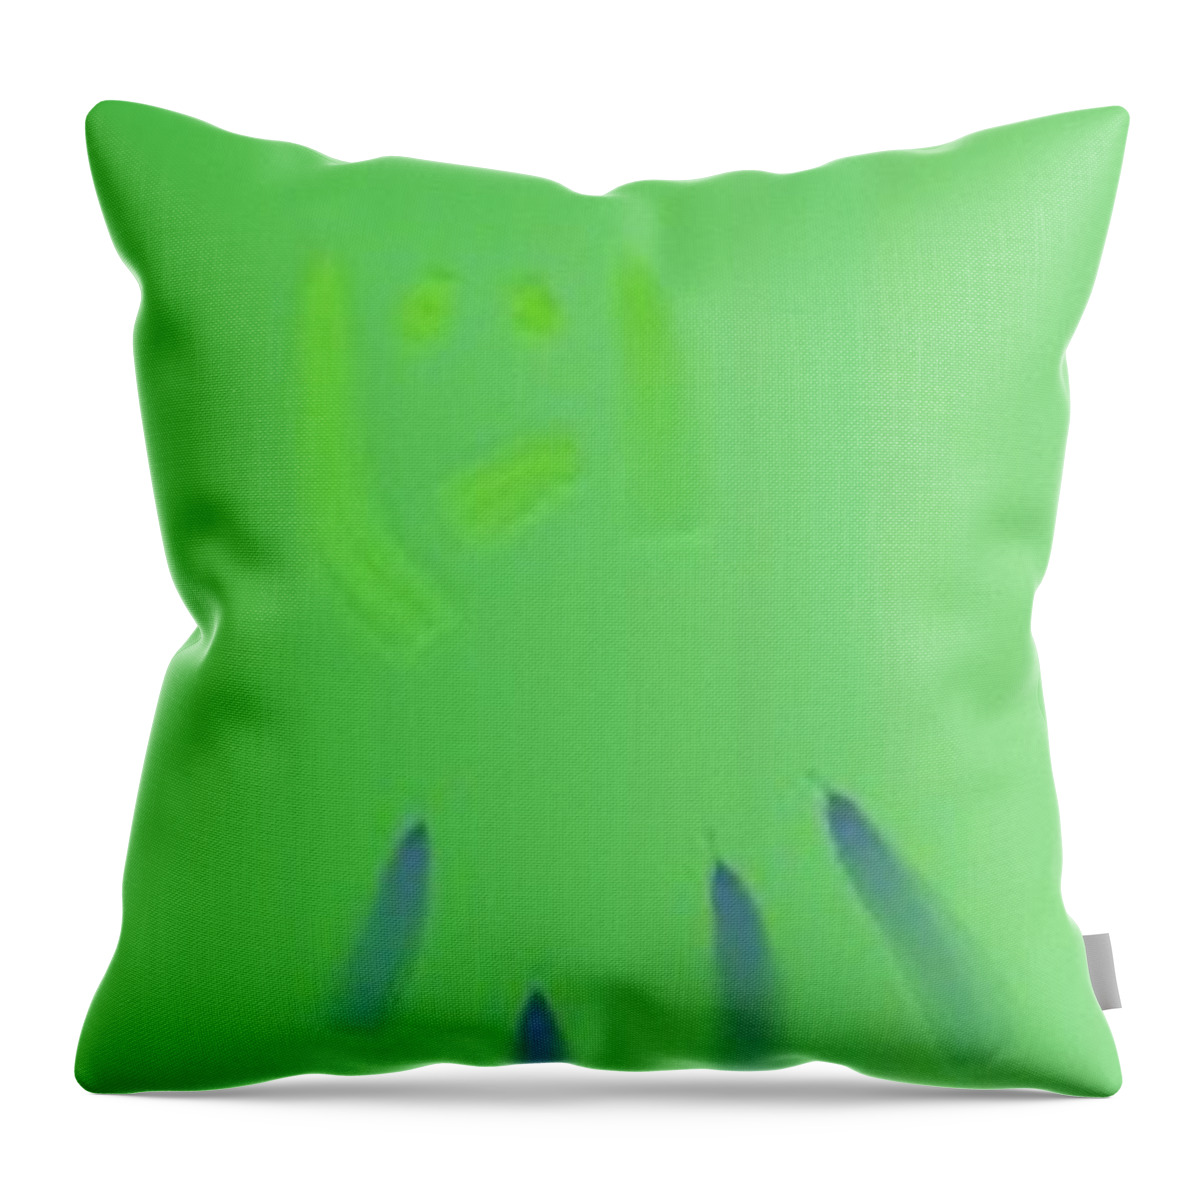 Little Man Throw Pillow featuring the painting Omino by Matteo TOTARO